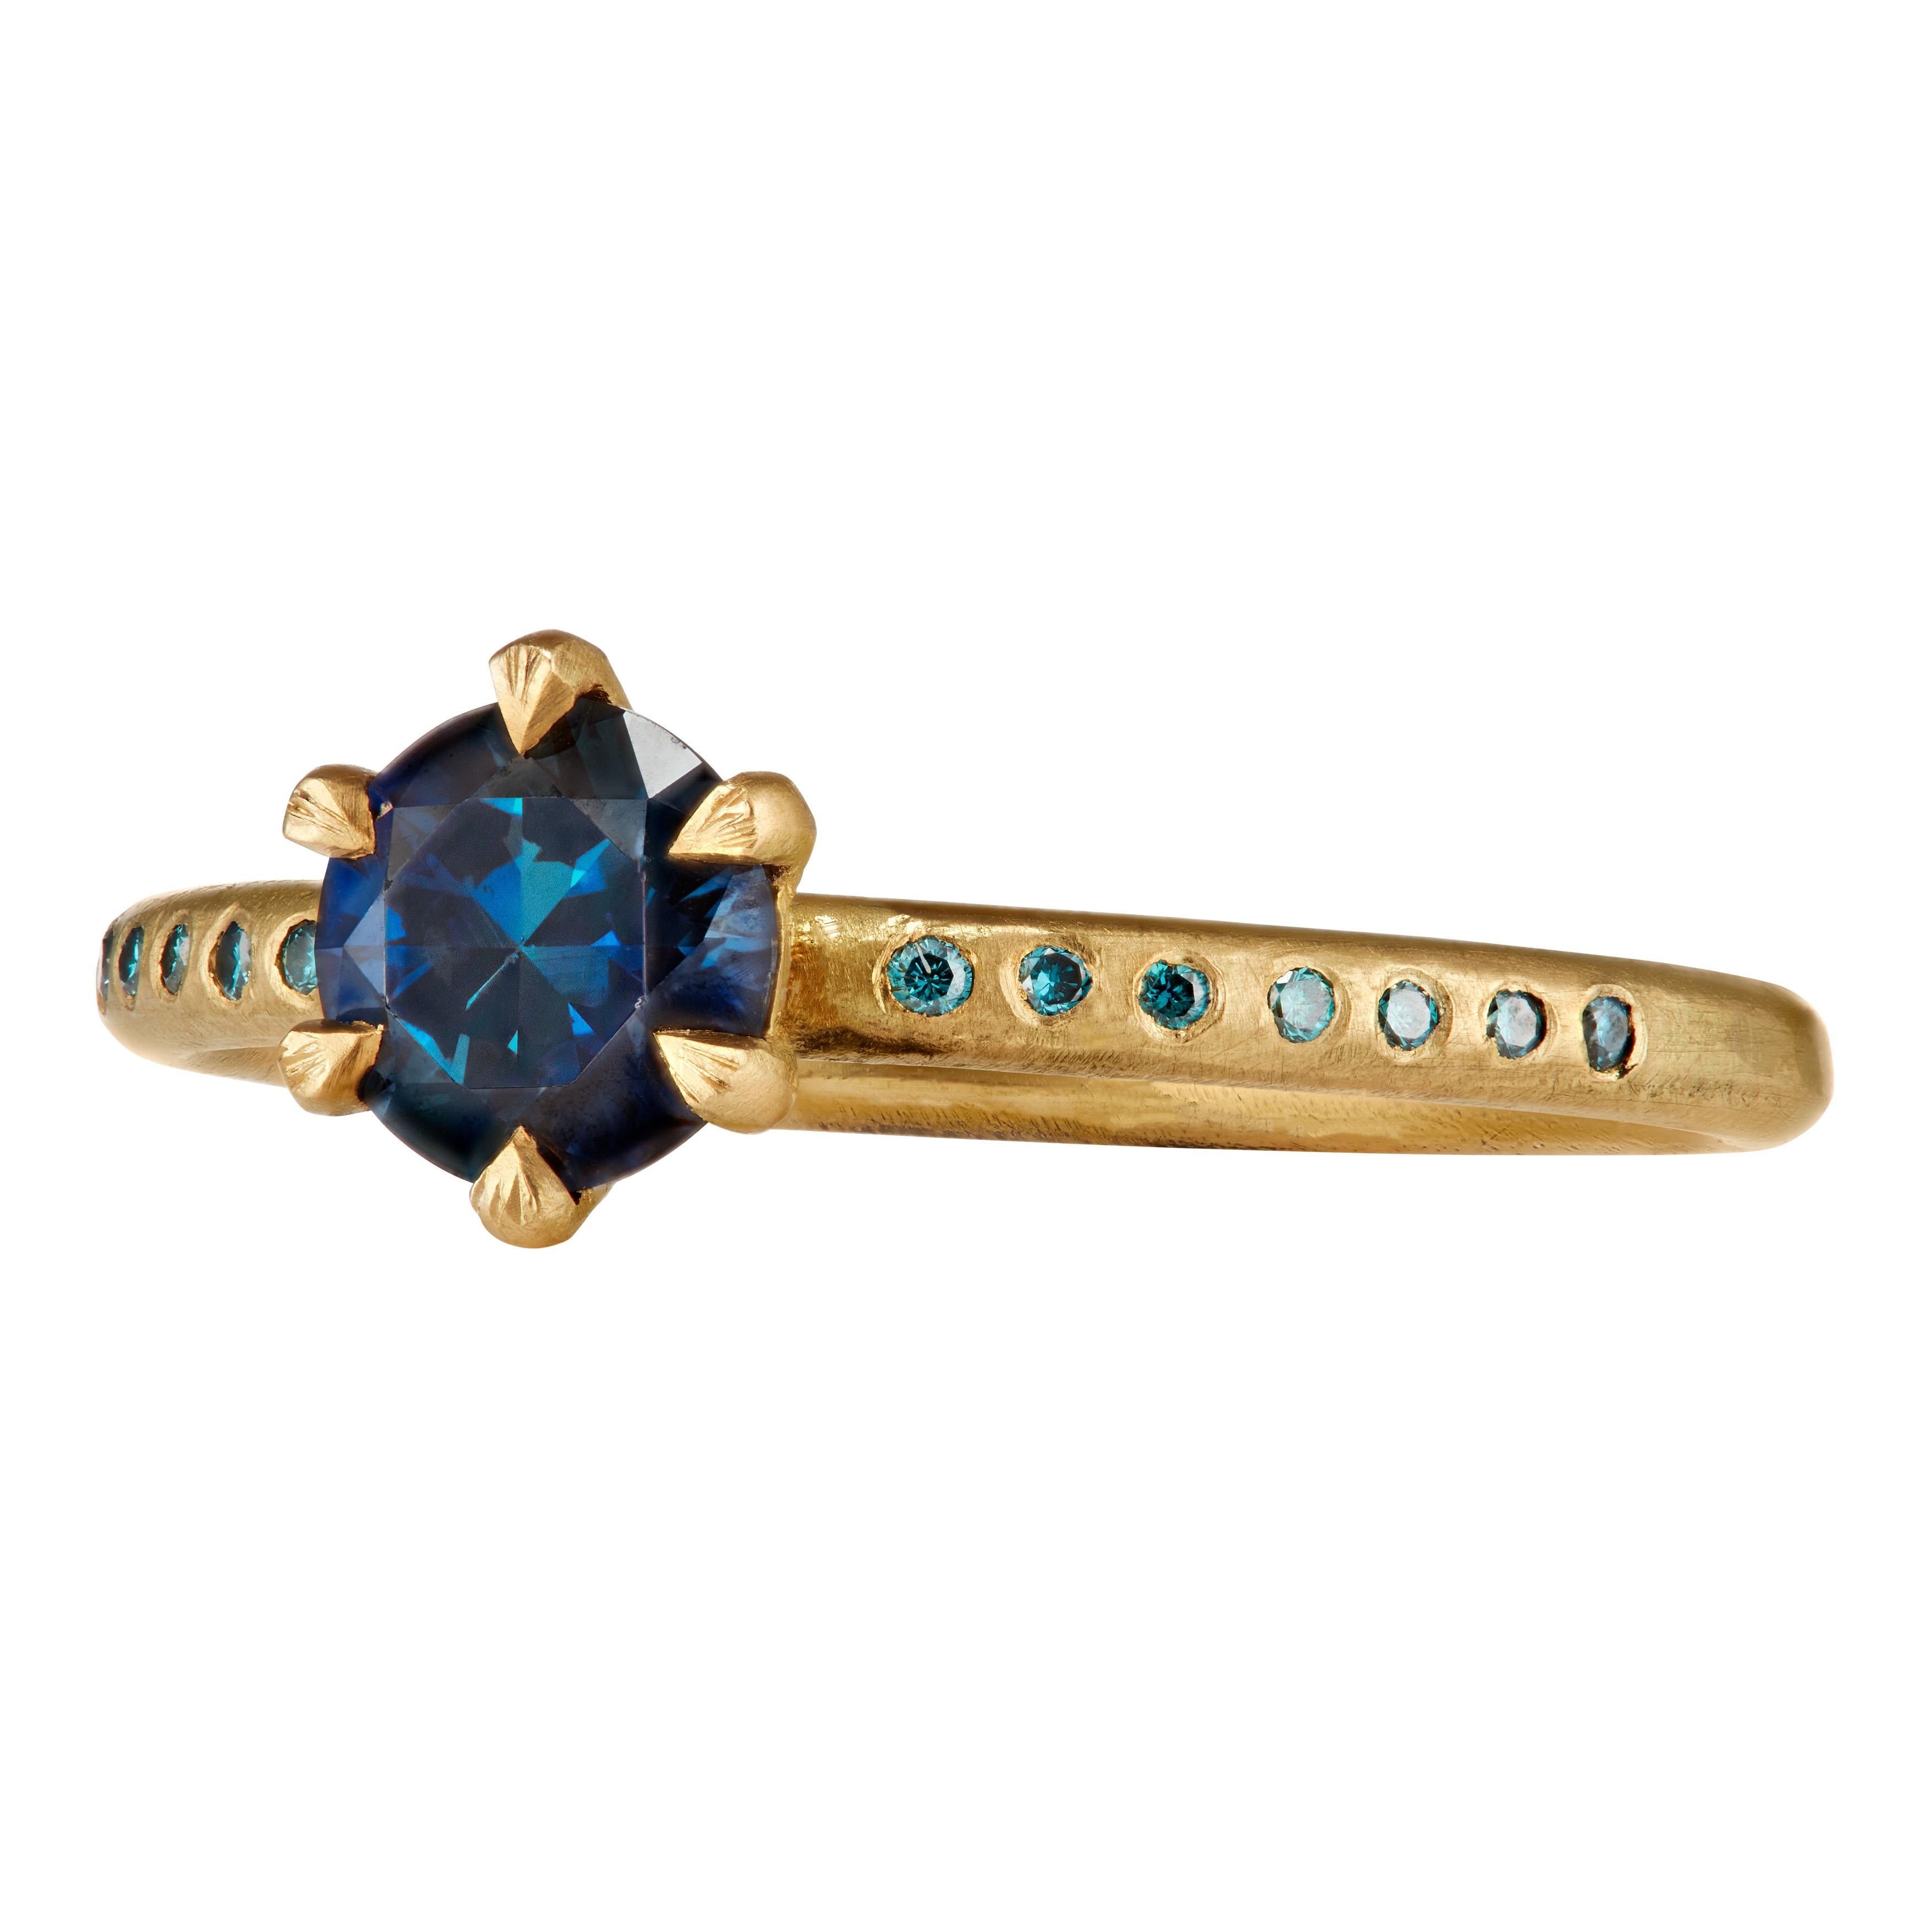 The ring’s center is a Parti blue/green sapphire of 0.75 carats. I have added fourteen turquoise diamonds to the band, giving the prong ring a thoroughly modern make-over.  

The band is round with slight hammer 1.95 mm diameter x 1.75 mm